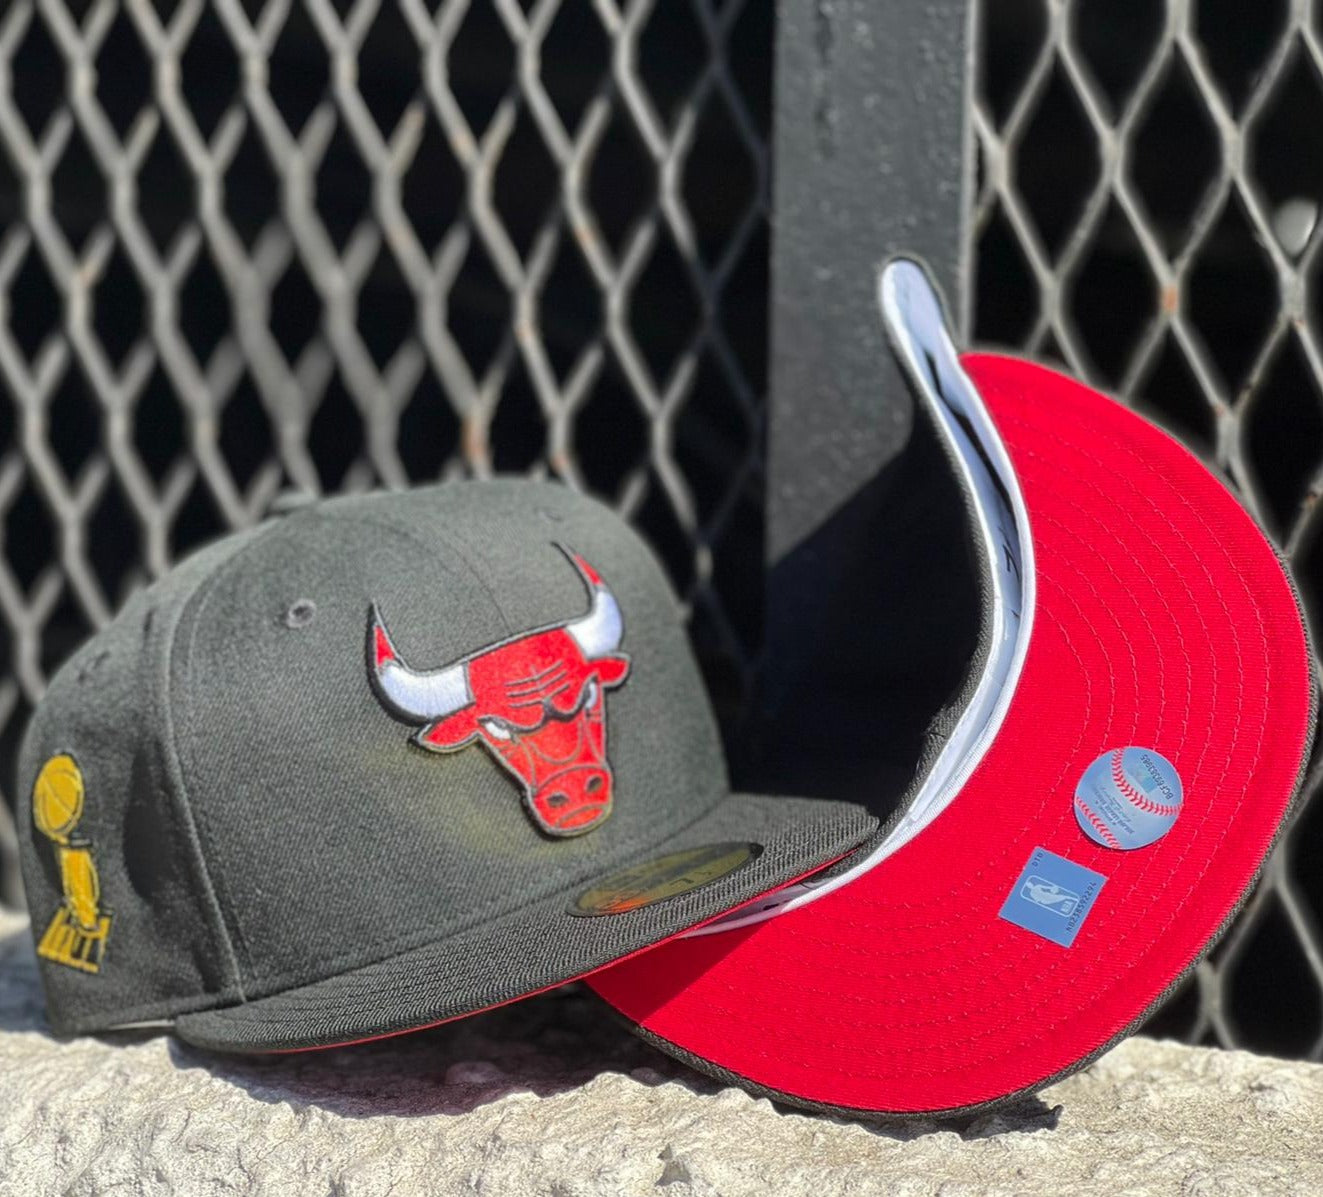 Buy Chicago Bulls Team Side Patch Black 9FIFTY Snapback Cap From Fancode  Shop.